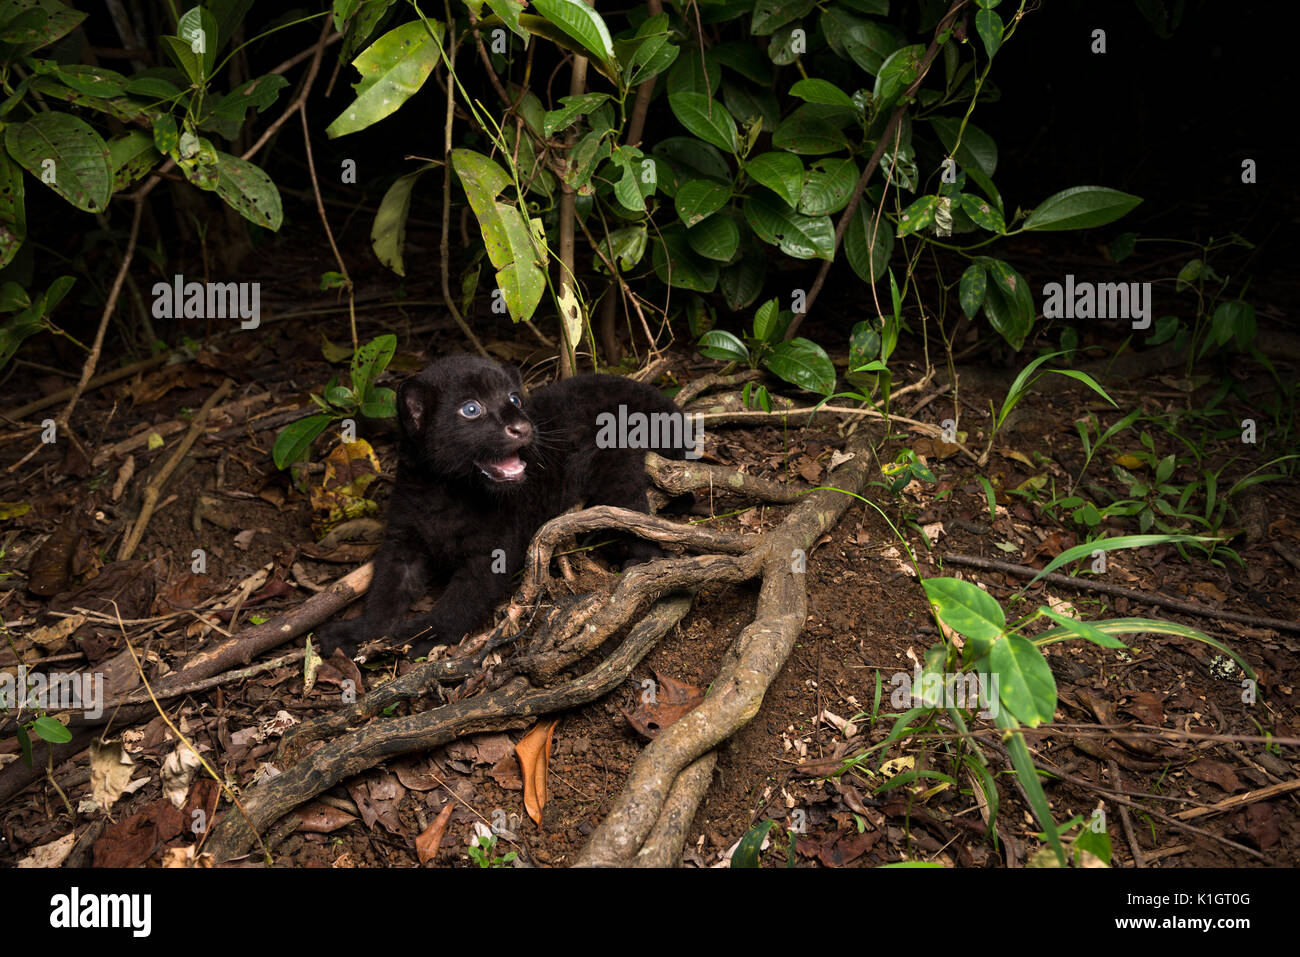 Baby Black Jaguar waiting for its mother inside a forest in Brazil. Stock Photo